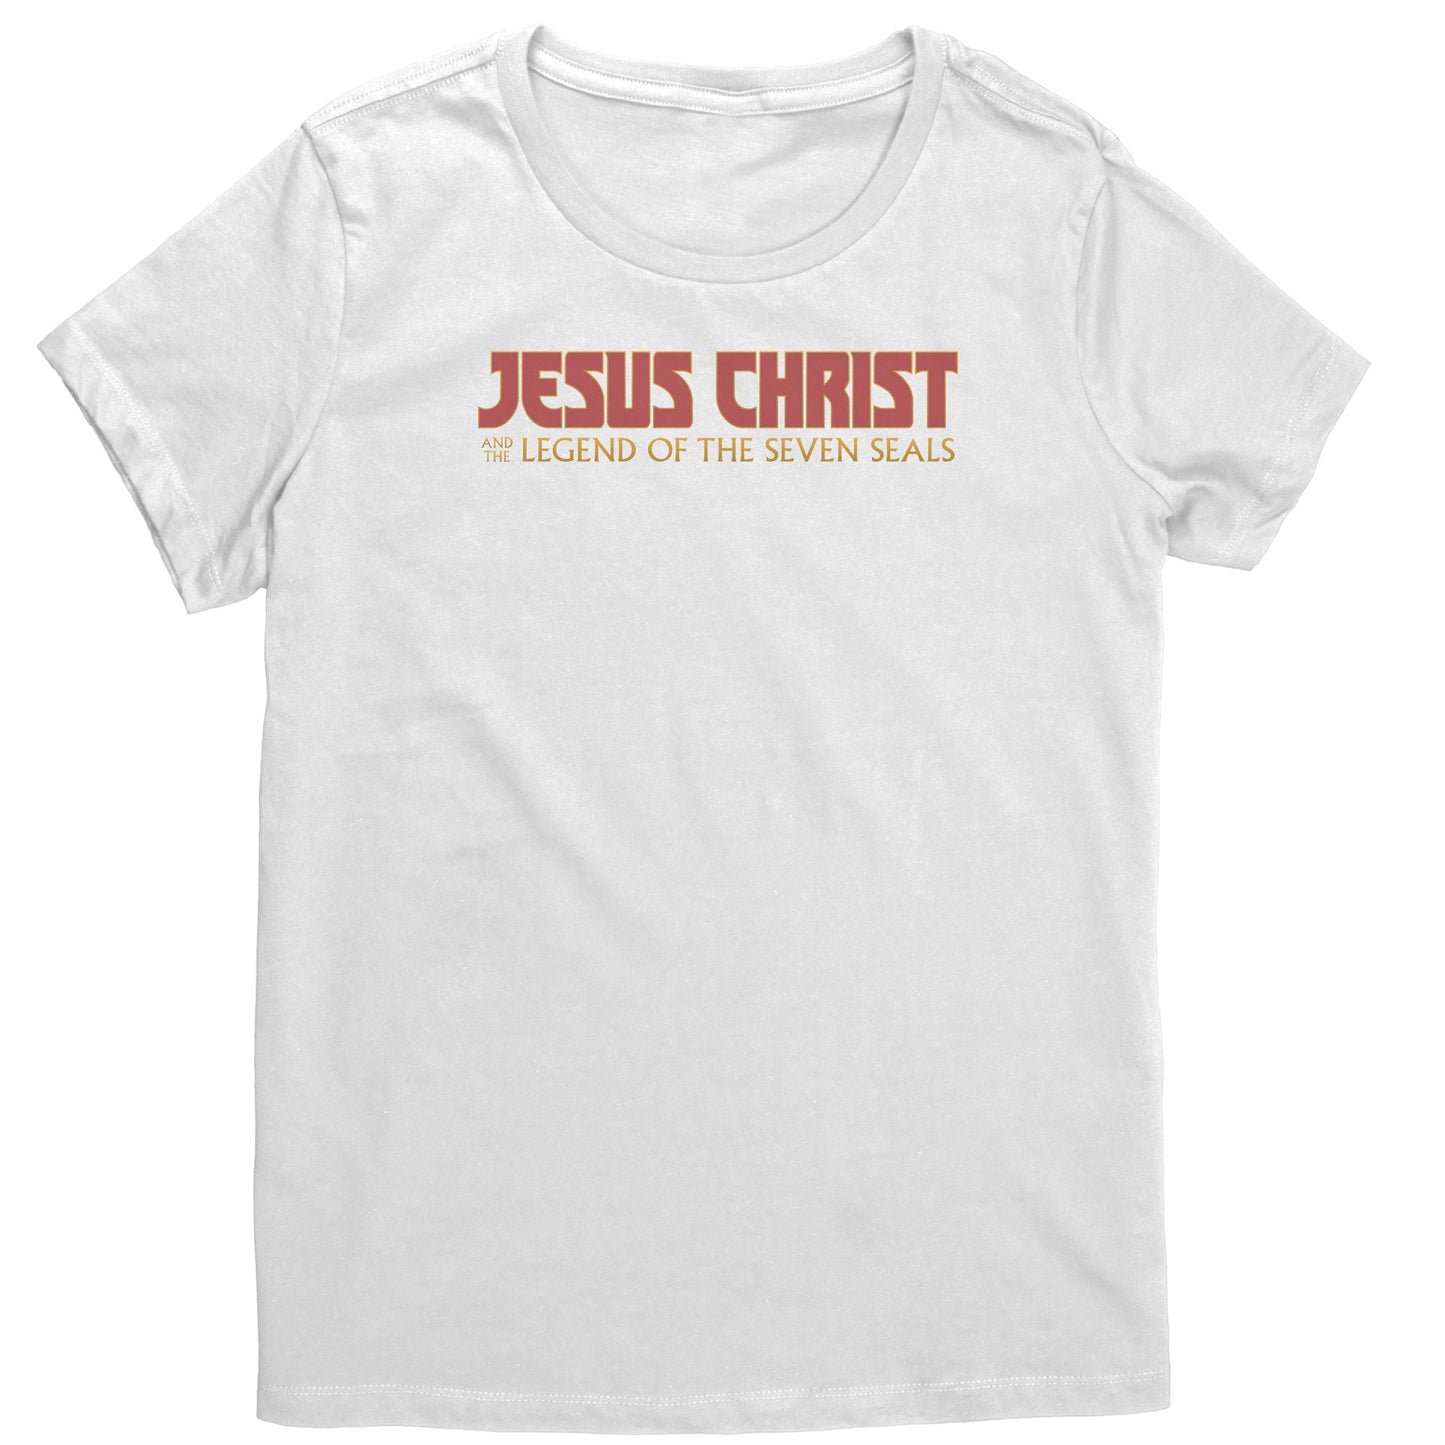 Jesus Christ and the Legend of the Seven Seals Women's T-Shirt